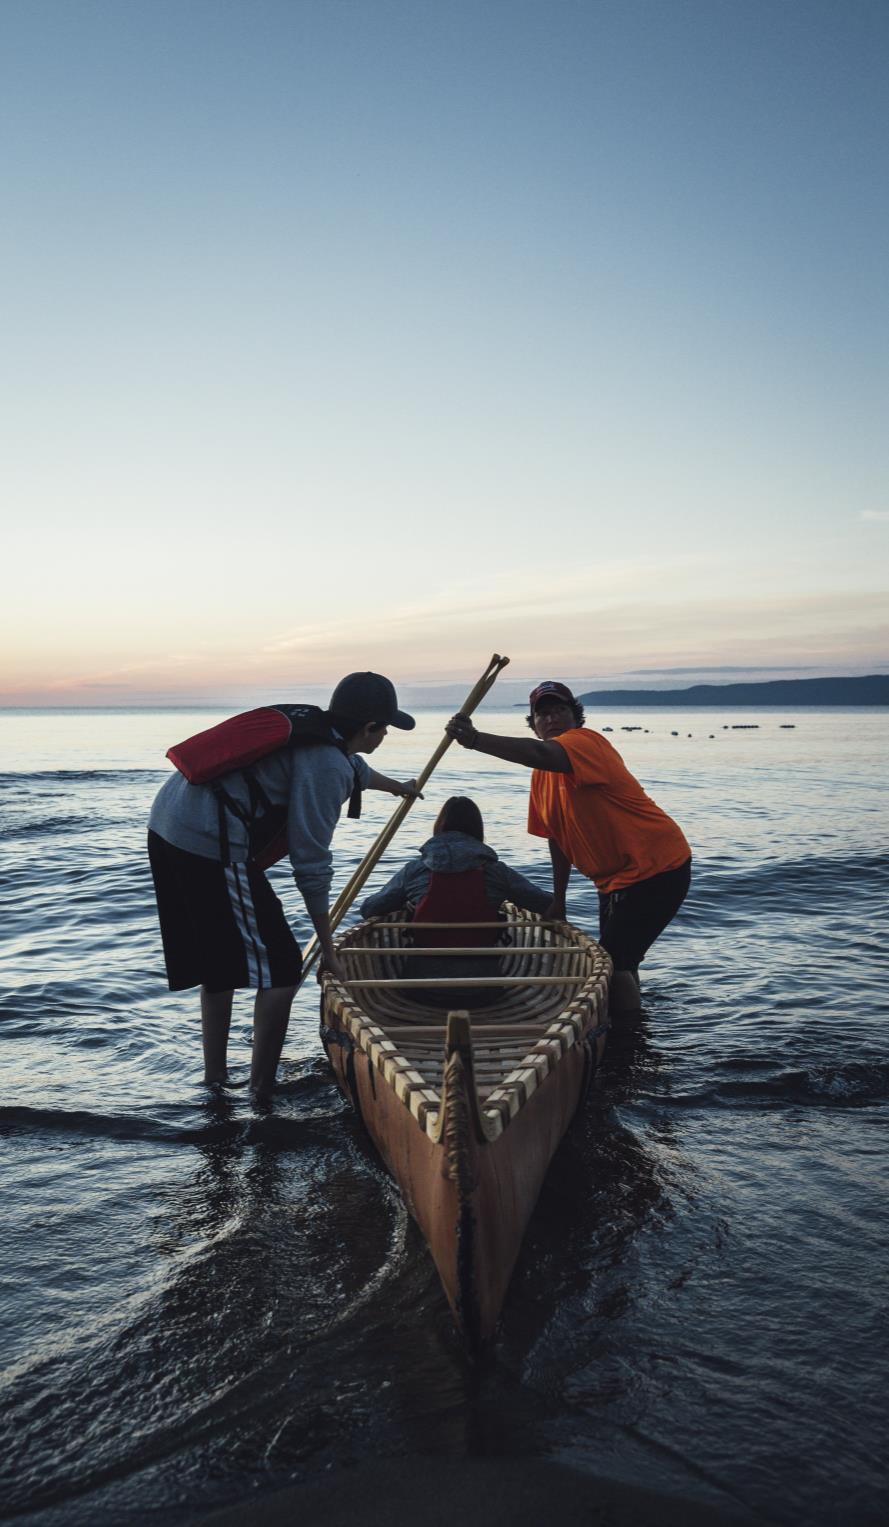 CAMPAIGN THEME: CONNECTIONS Connections form the backbone and overarching theme of the Canadian Canoe Culture campaign.